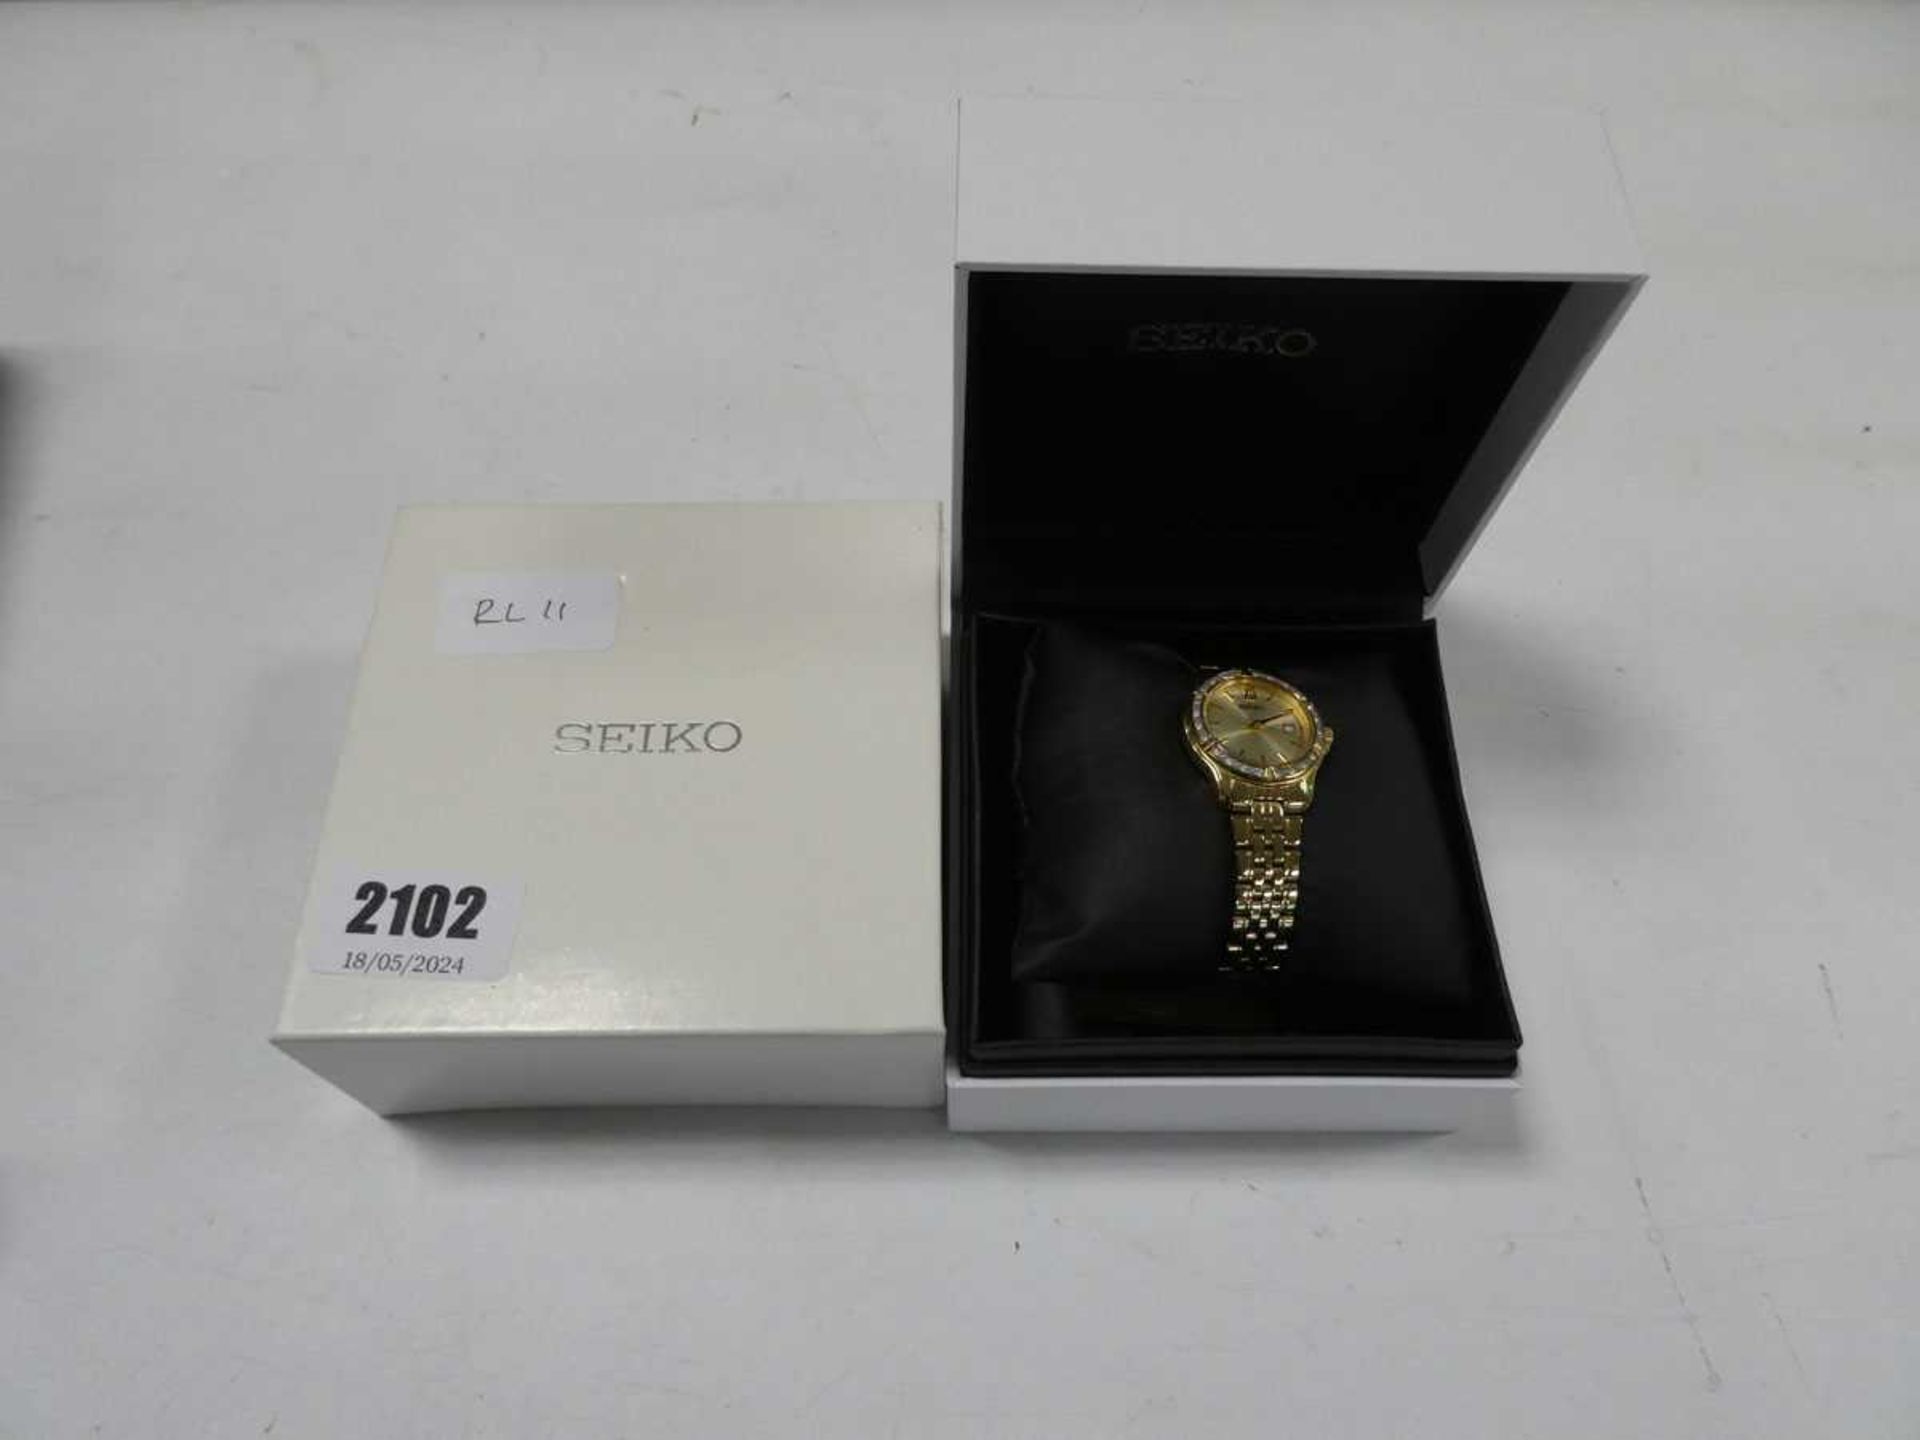 Seiko ladies wristwatch with gold face with bejewelled trim and gold coloured steel strap